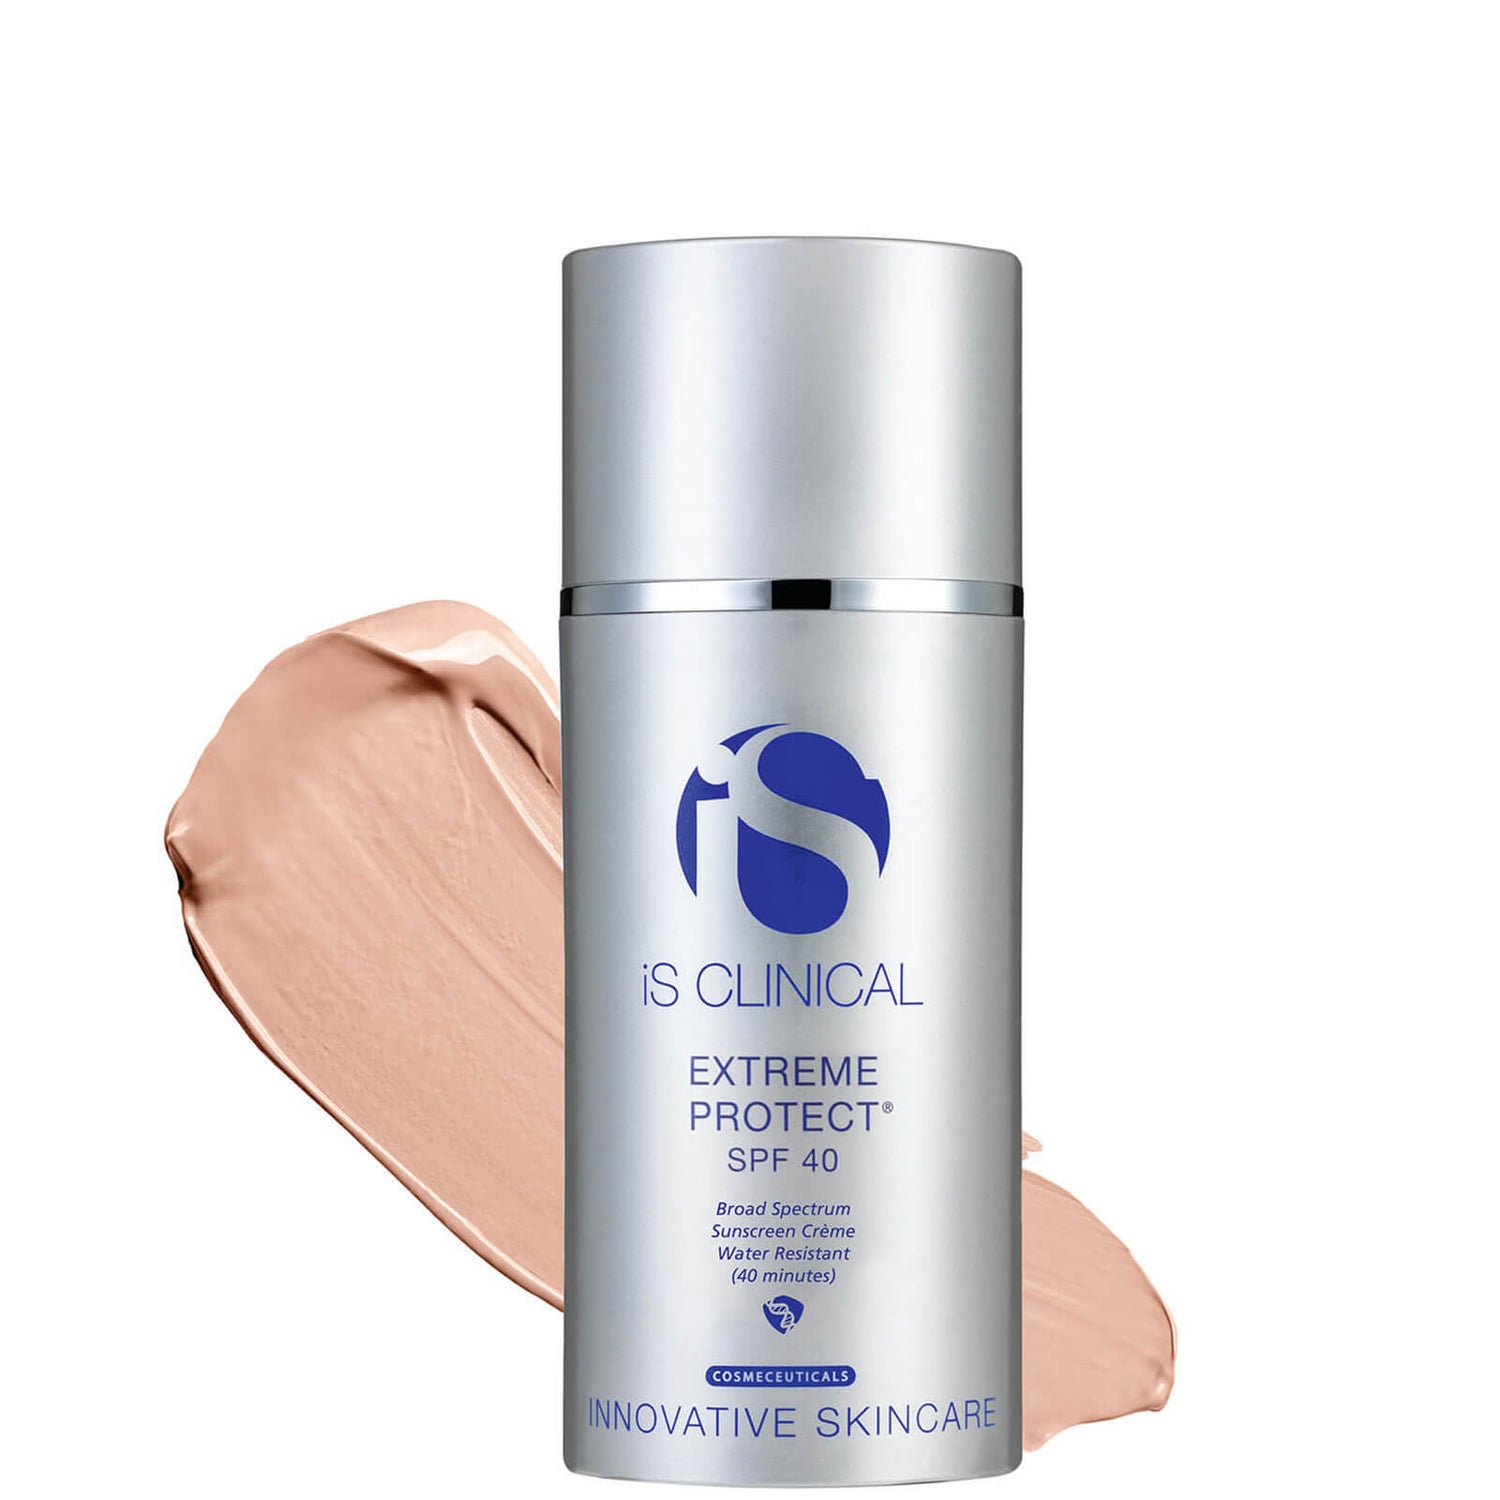 iS Clinical Extreme Protect SPF 40 PerfecTint 100 g. - Beige